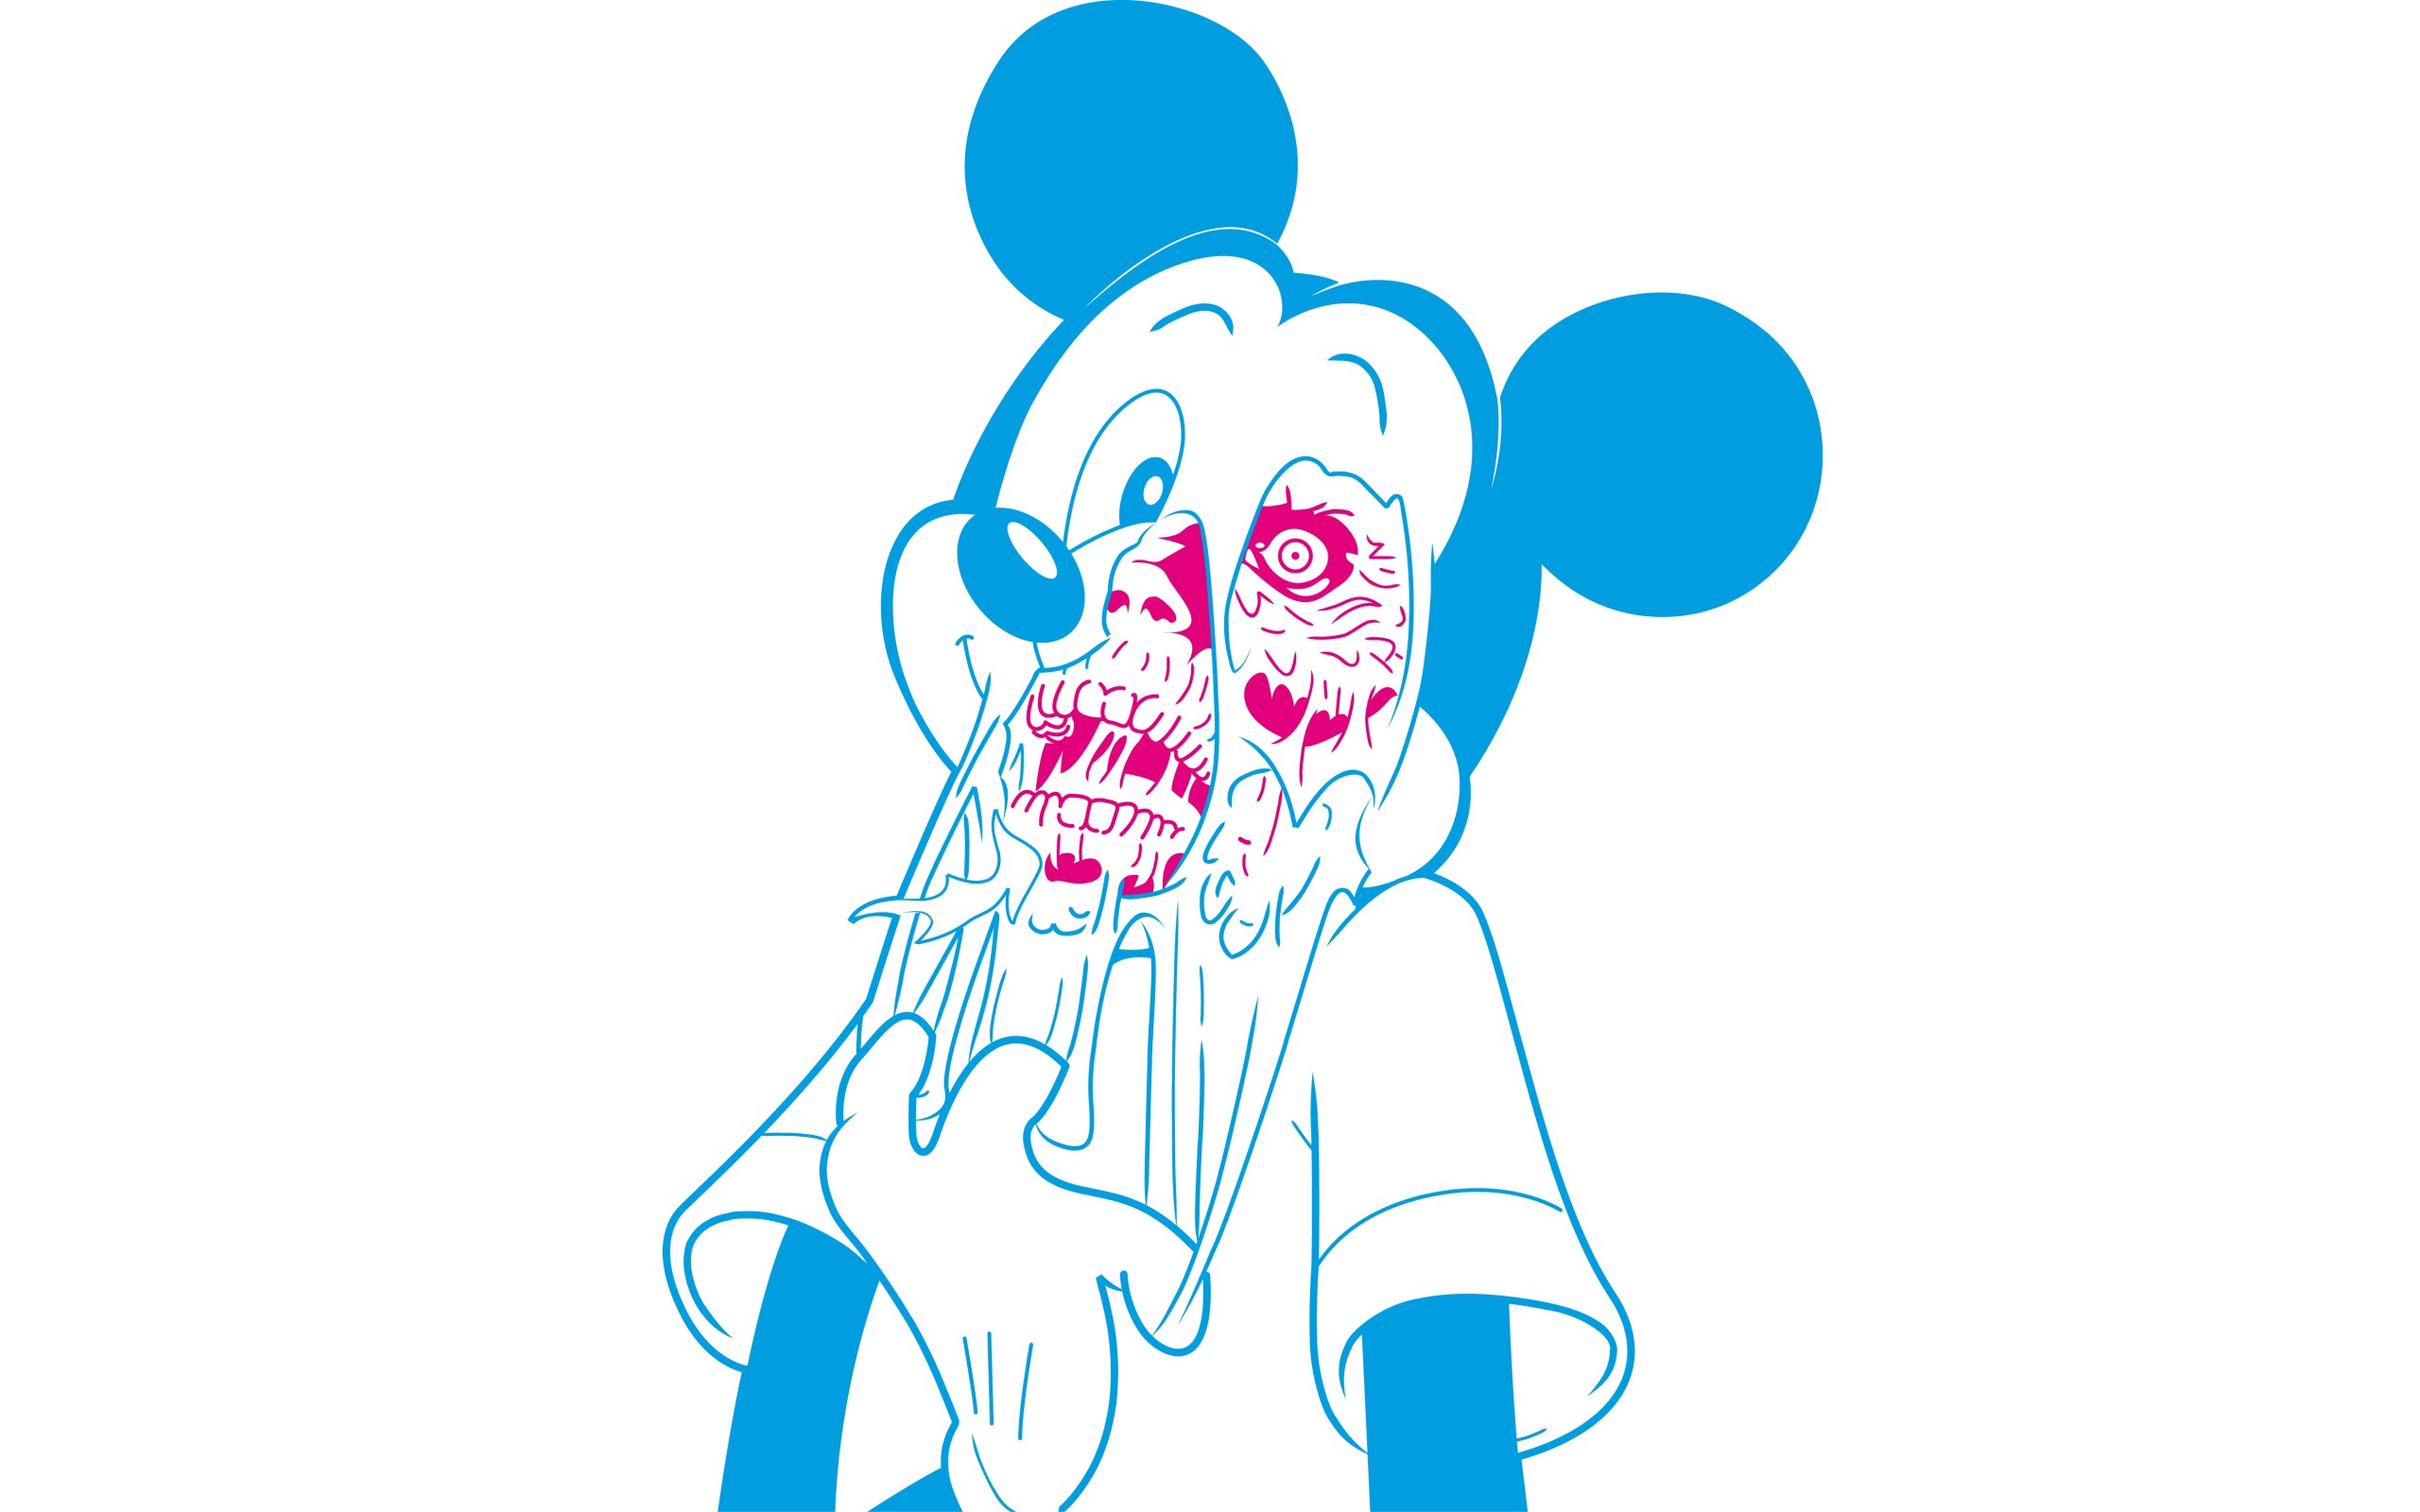 General 2560x1600 Mickey Mouse skull horror artwork white background zombies cyan white mask simple background digital art